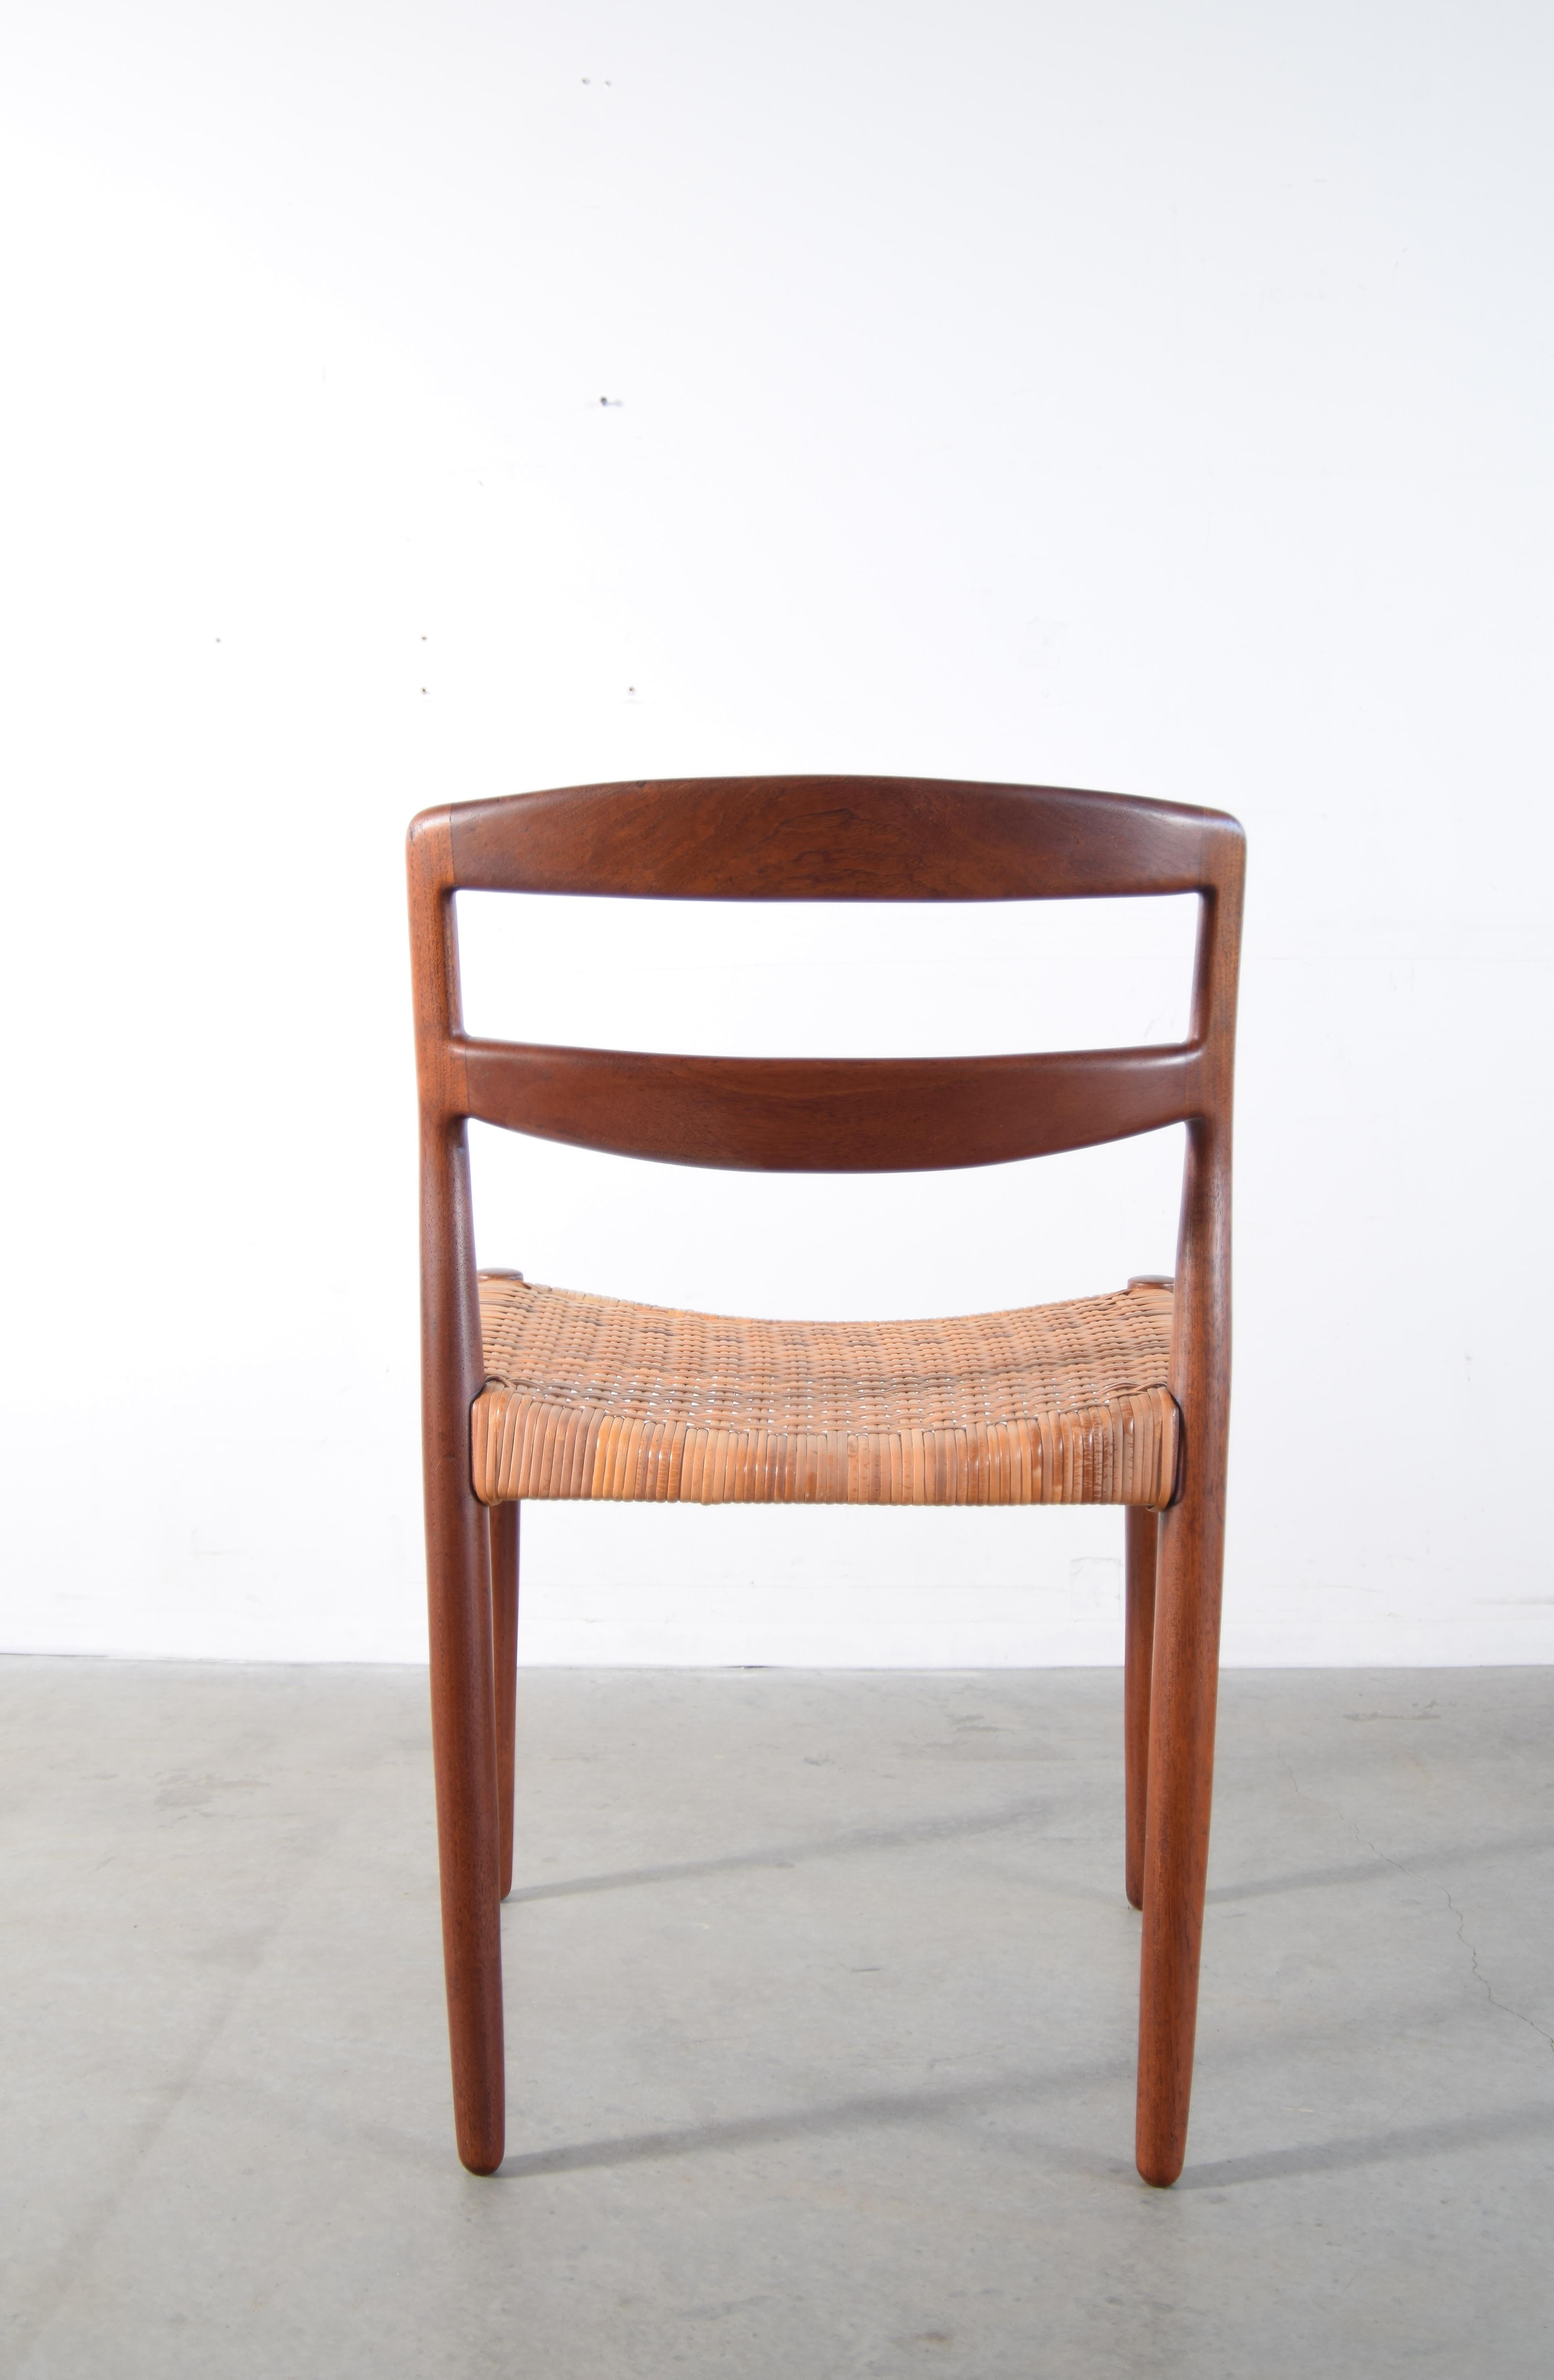 Pair of Ejner Larsen and Aksel Bender Madsen Teak and Cane Chairs For Sale 8